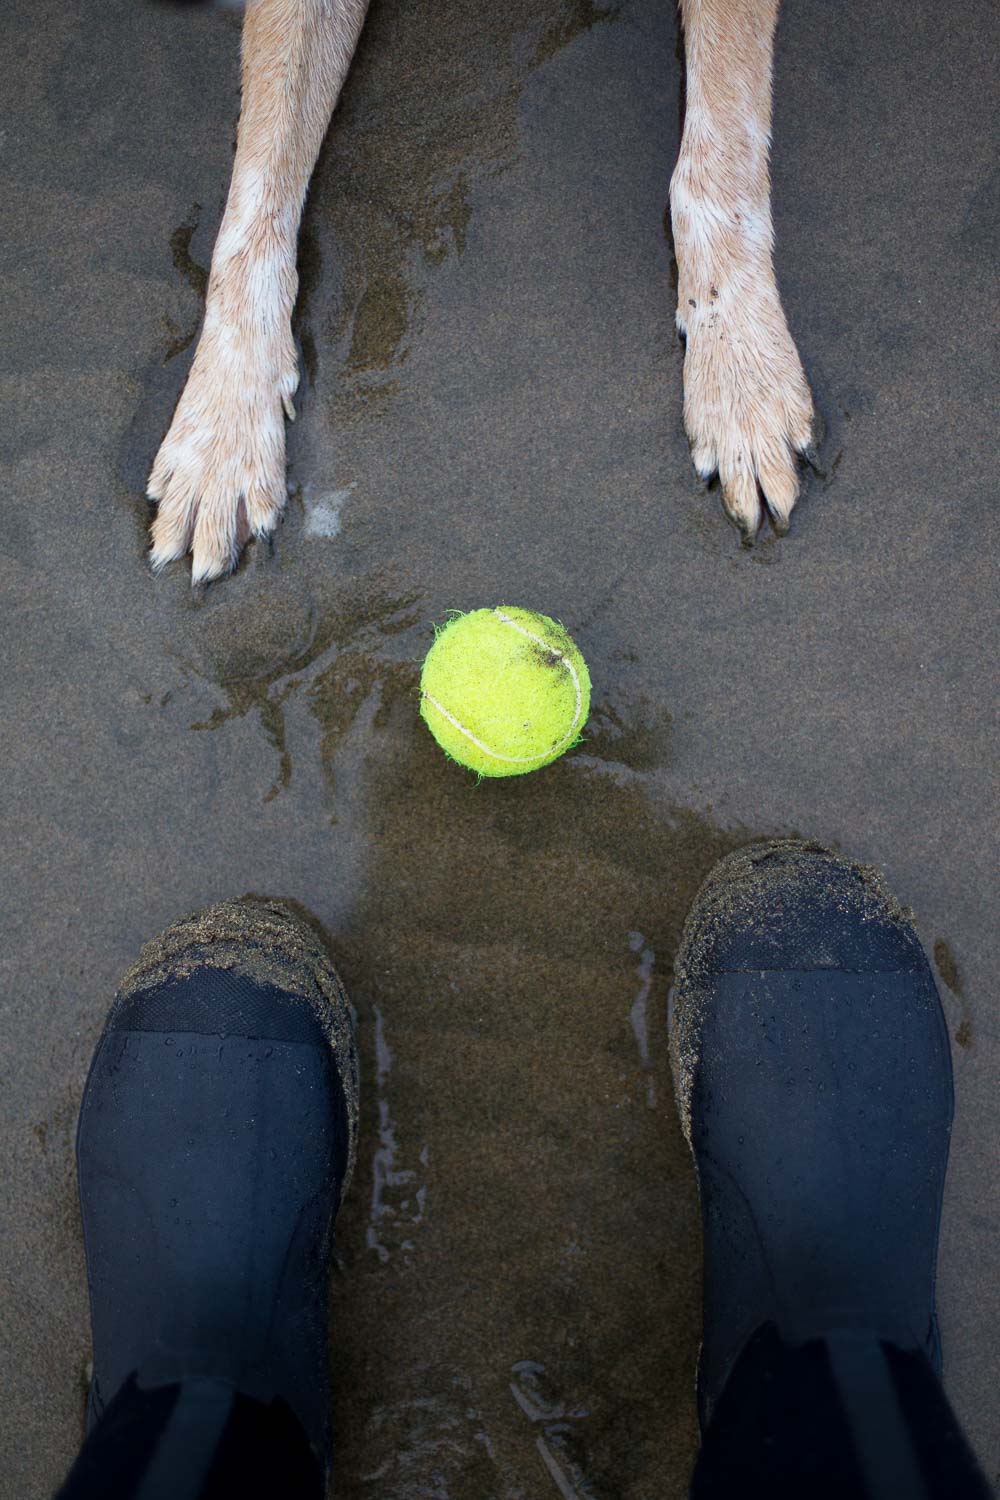 A person in boots and a dog standing opposite each other with a tennis ball in between on wet sand.